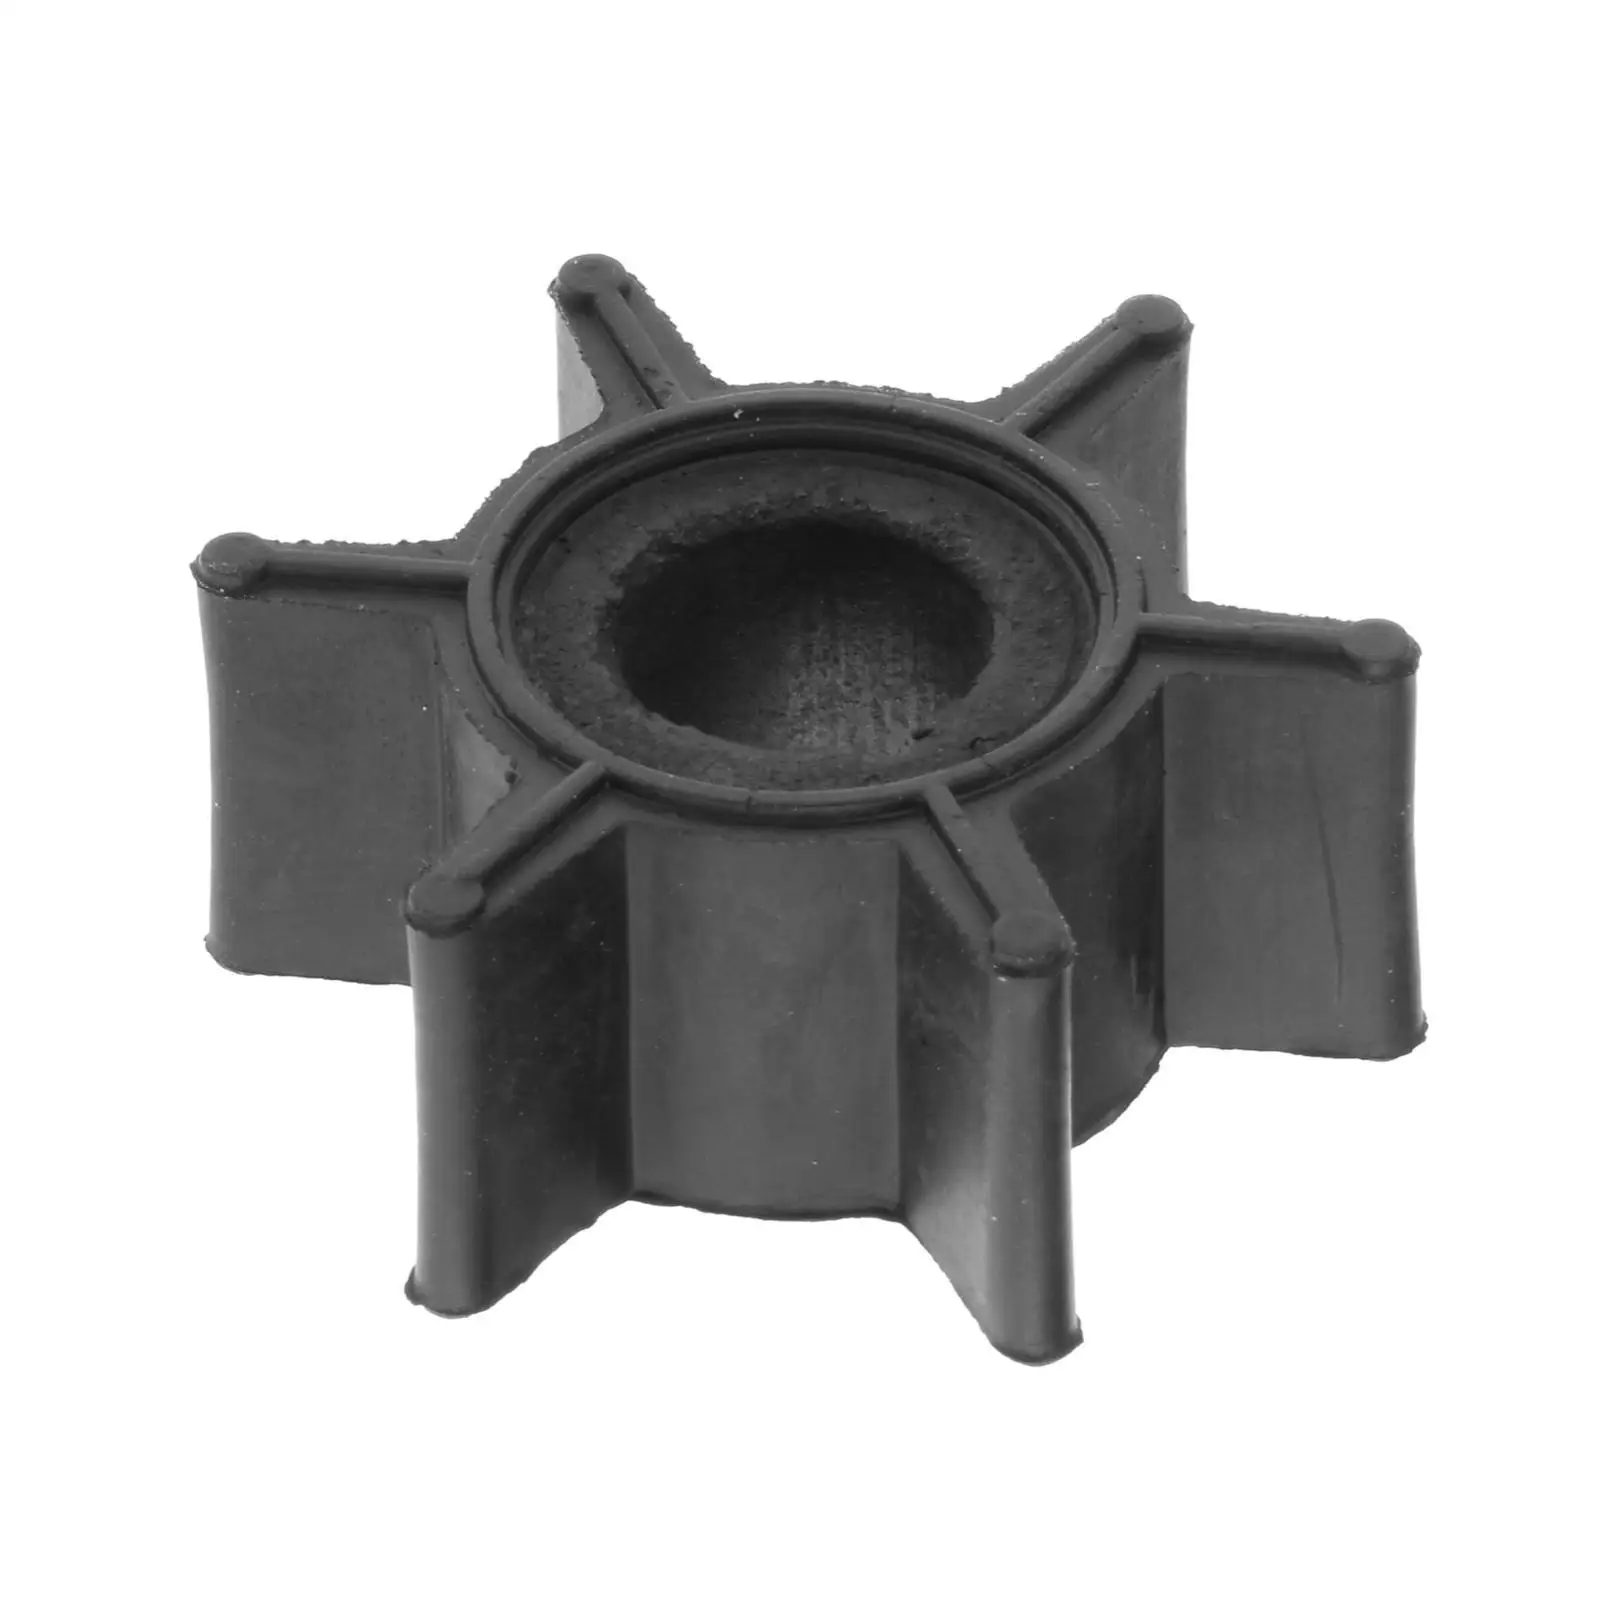 Water Pump Impeller for 2HP 2.5HP 3.5HP 2 / 4 Stroke Outboard Engine